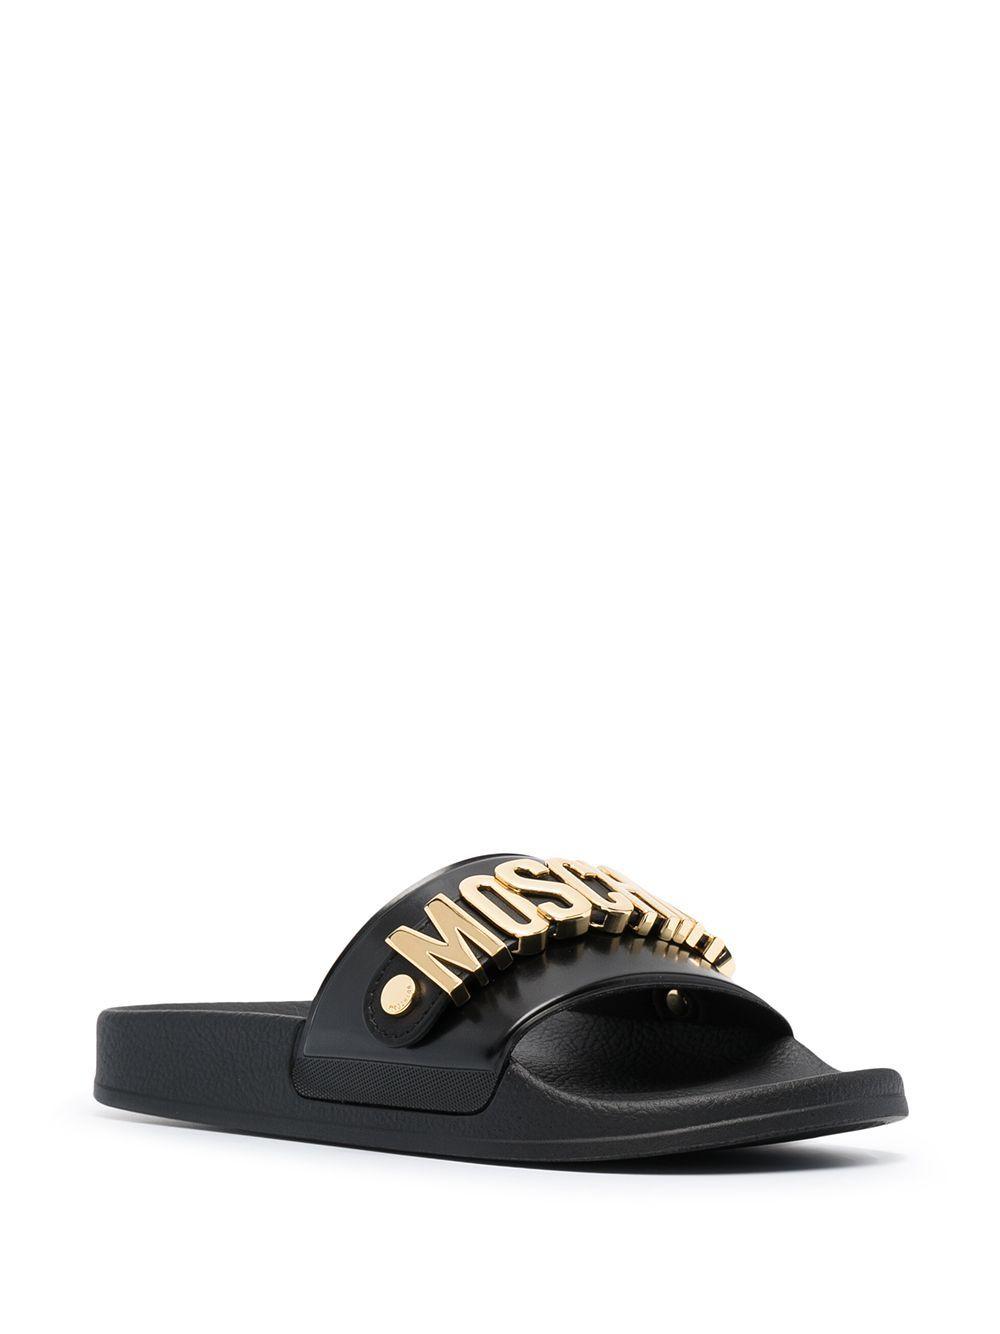 Moschino Leather Sandals in Black - Lyst